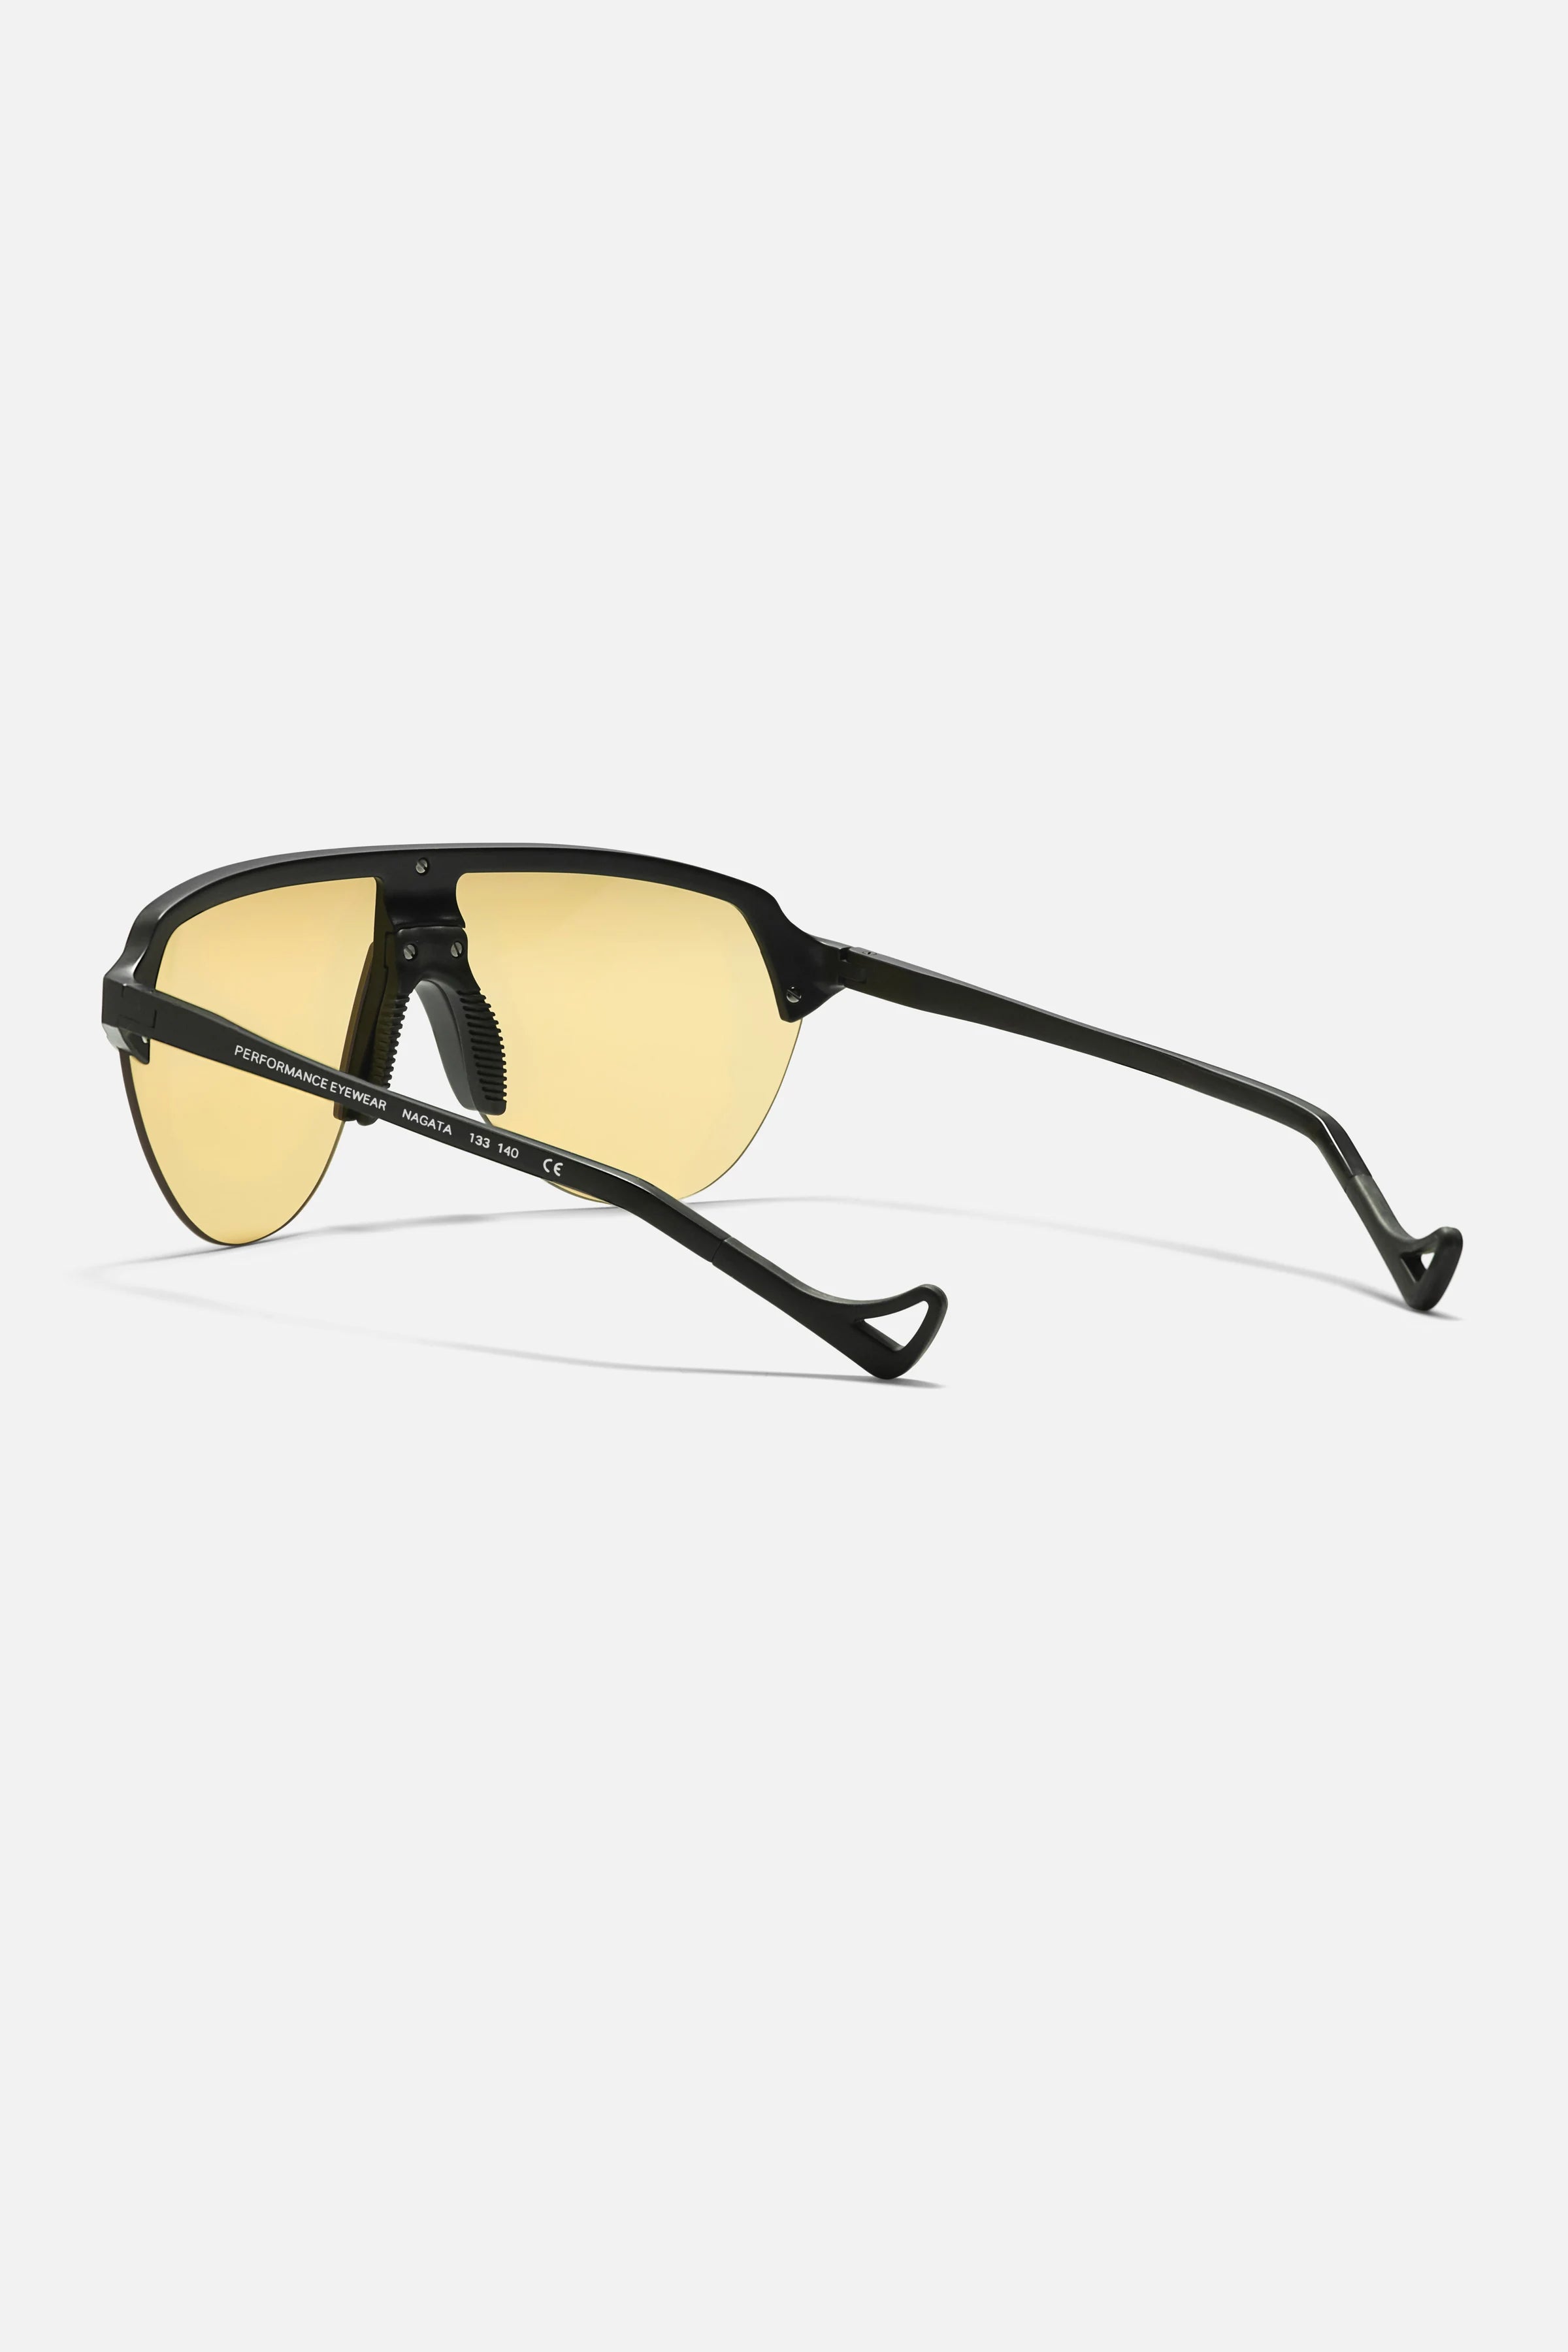 10 speed dealer sunglasses we're shopping and loving